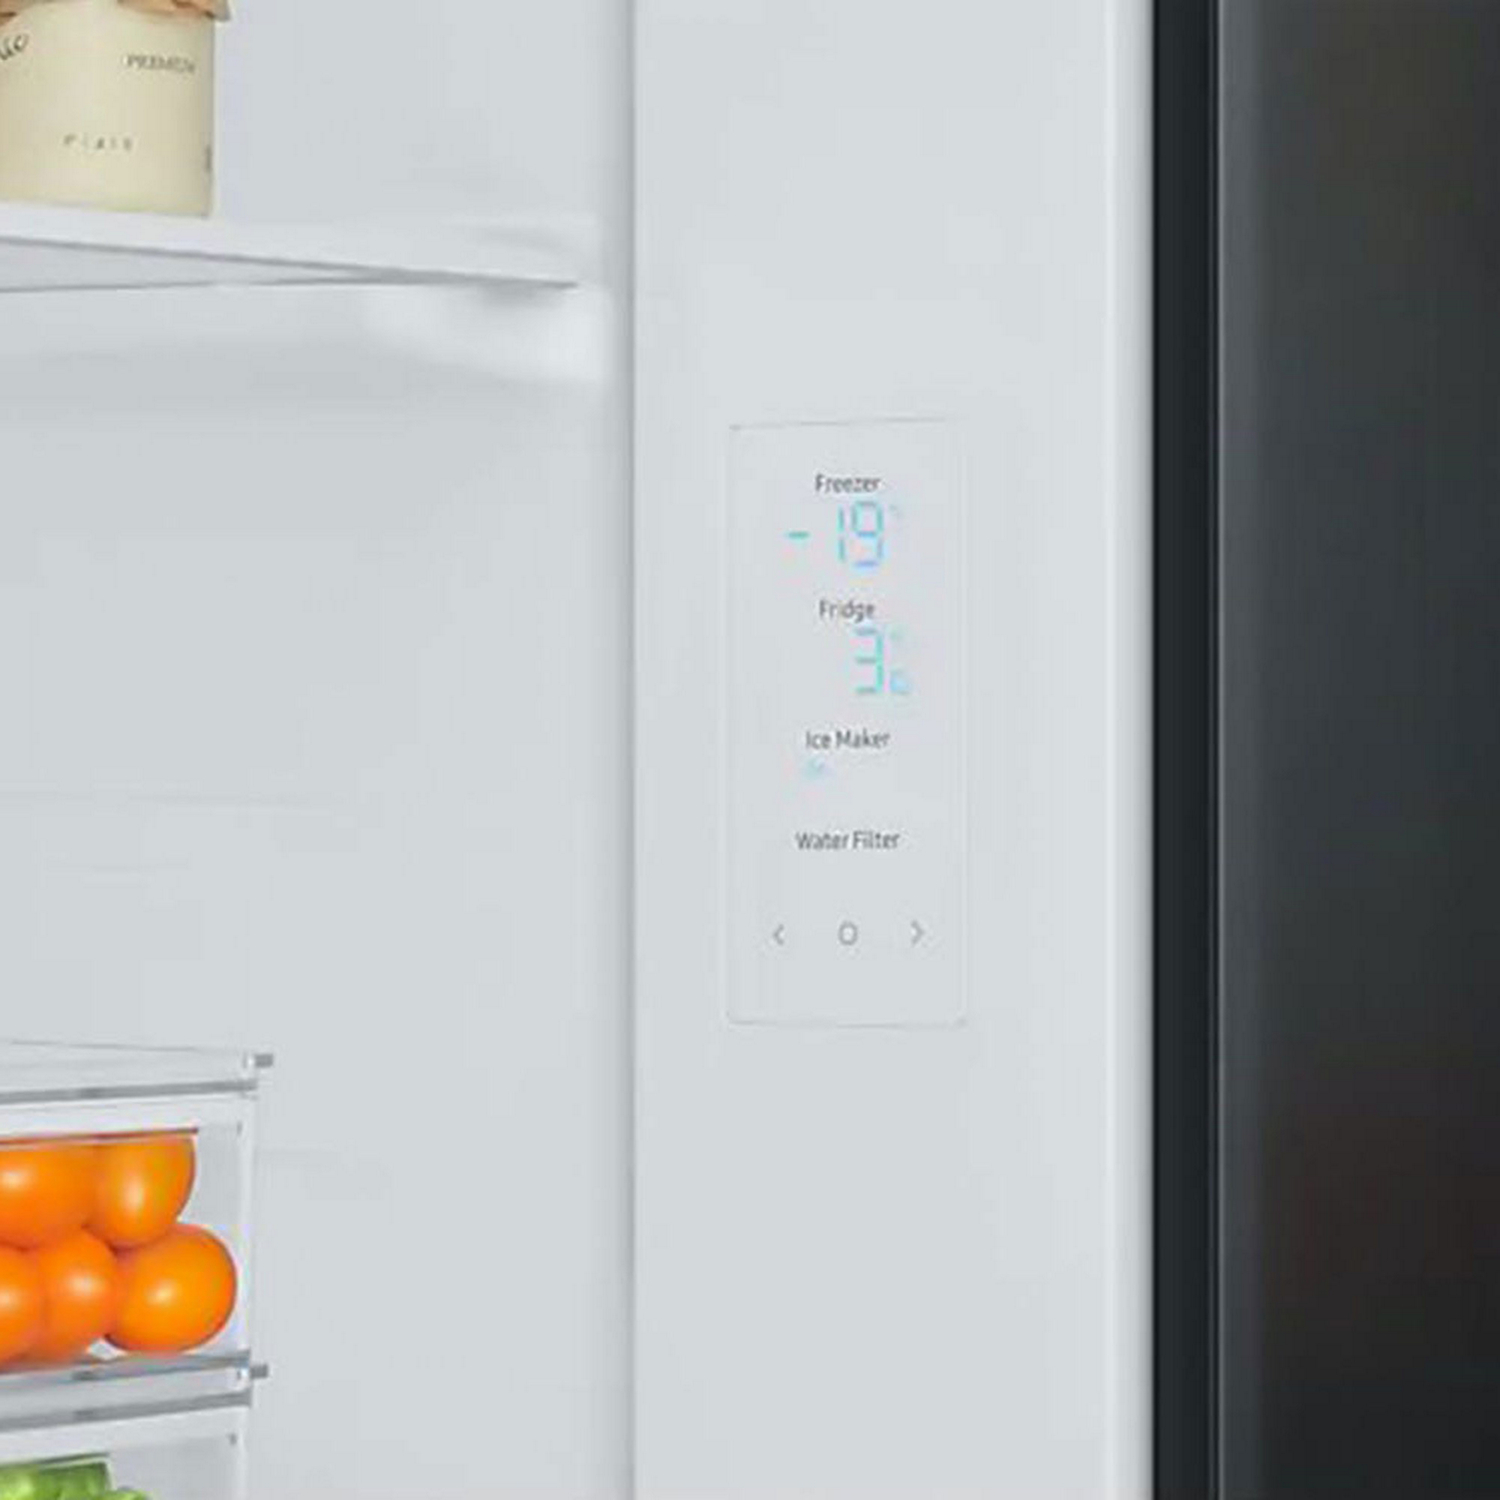 RS8000 7 Series American Style Fridge Freezer With SpaceMax™ Technology